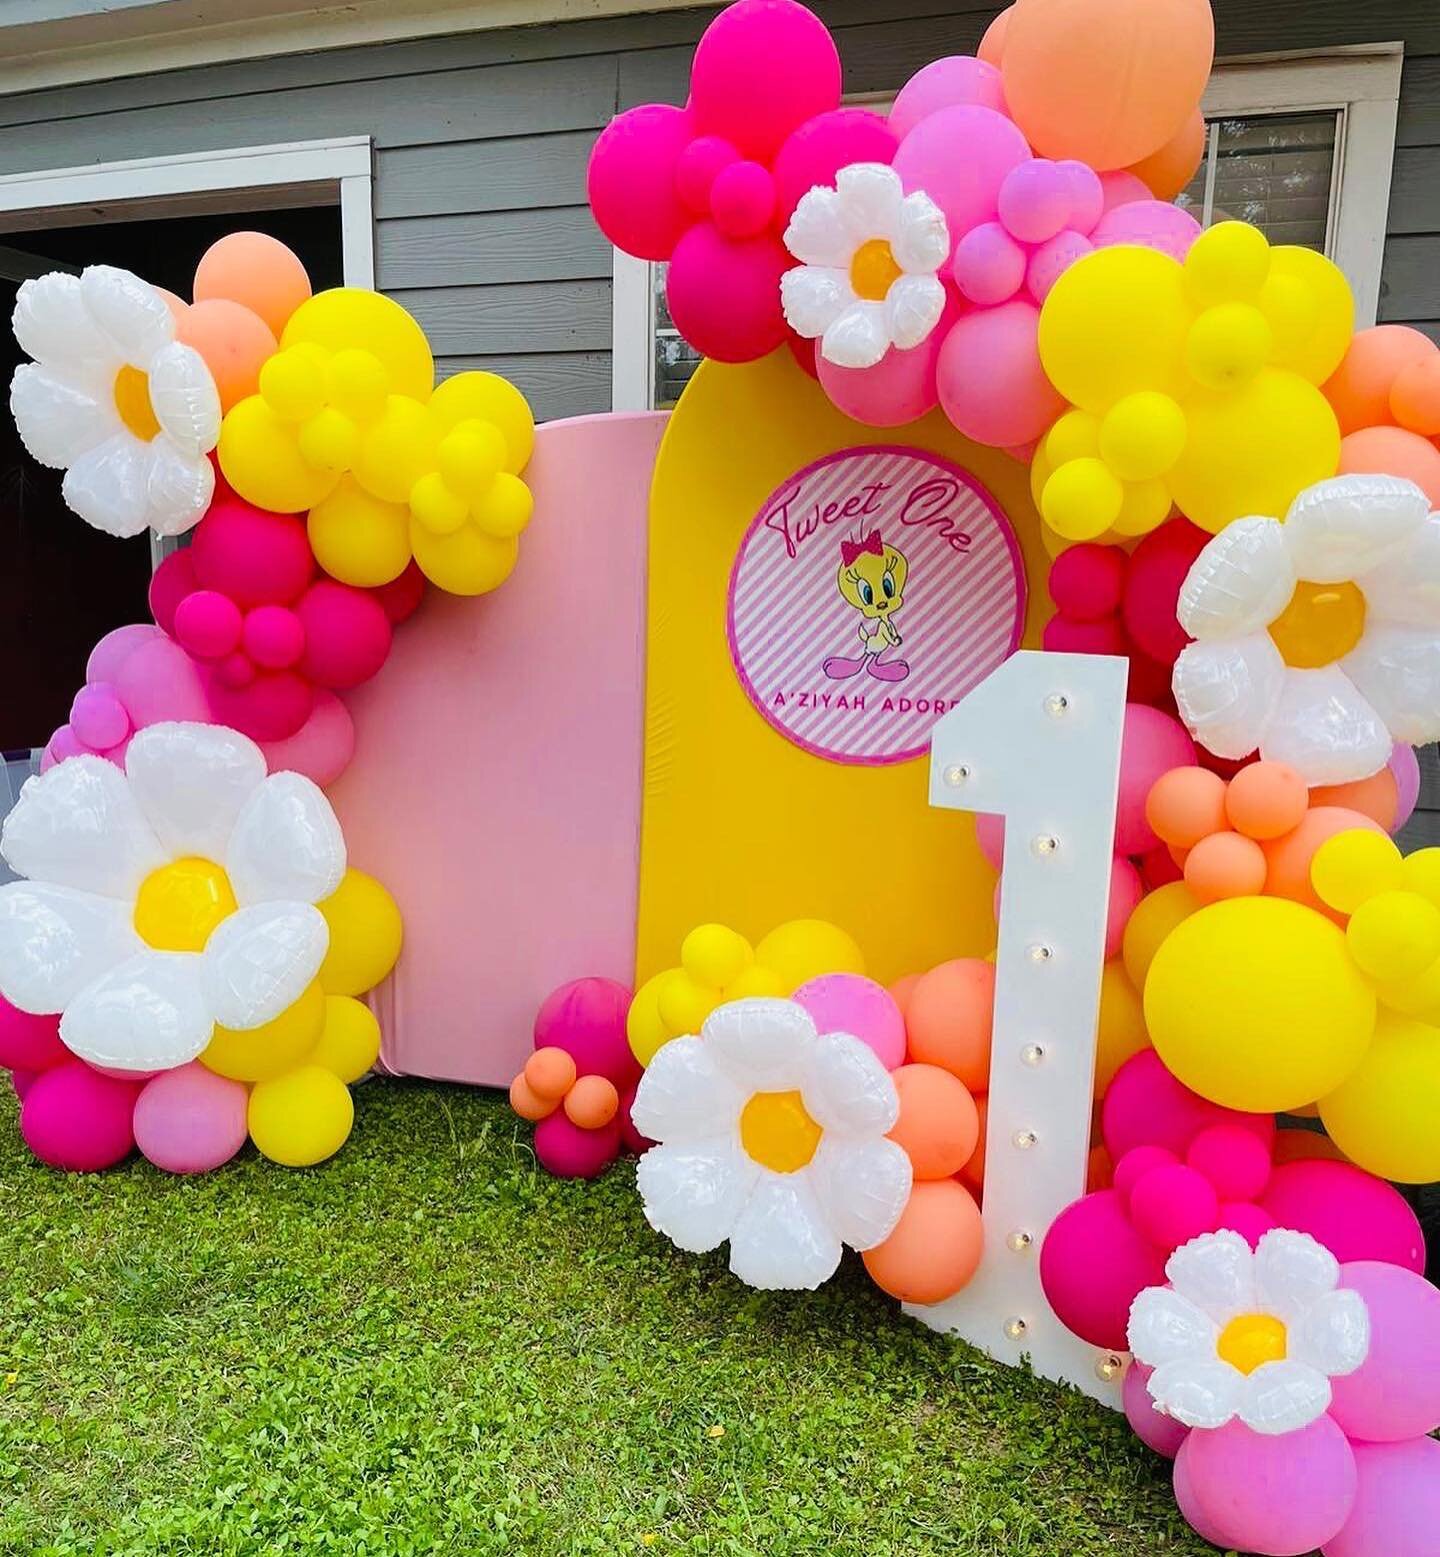 🩷🌼🧡 
.
.
.
www.littlelavishparty.com
.
..
Houston kids birthday party balloons decor kids tables and chairs Backdrop soft play